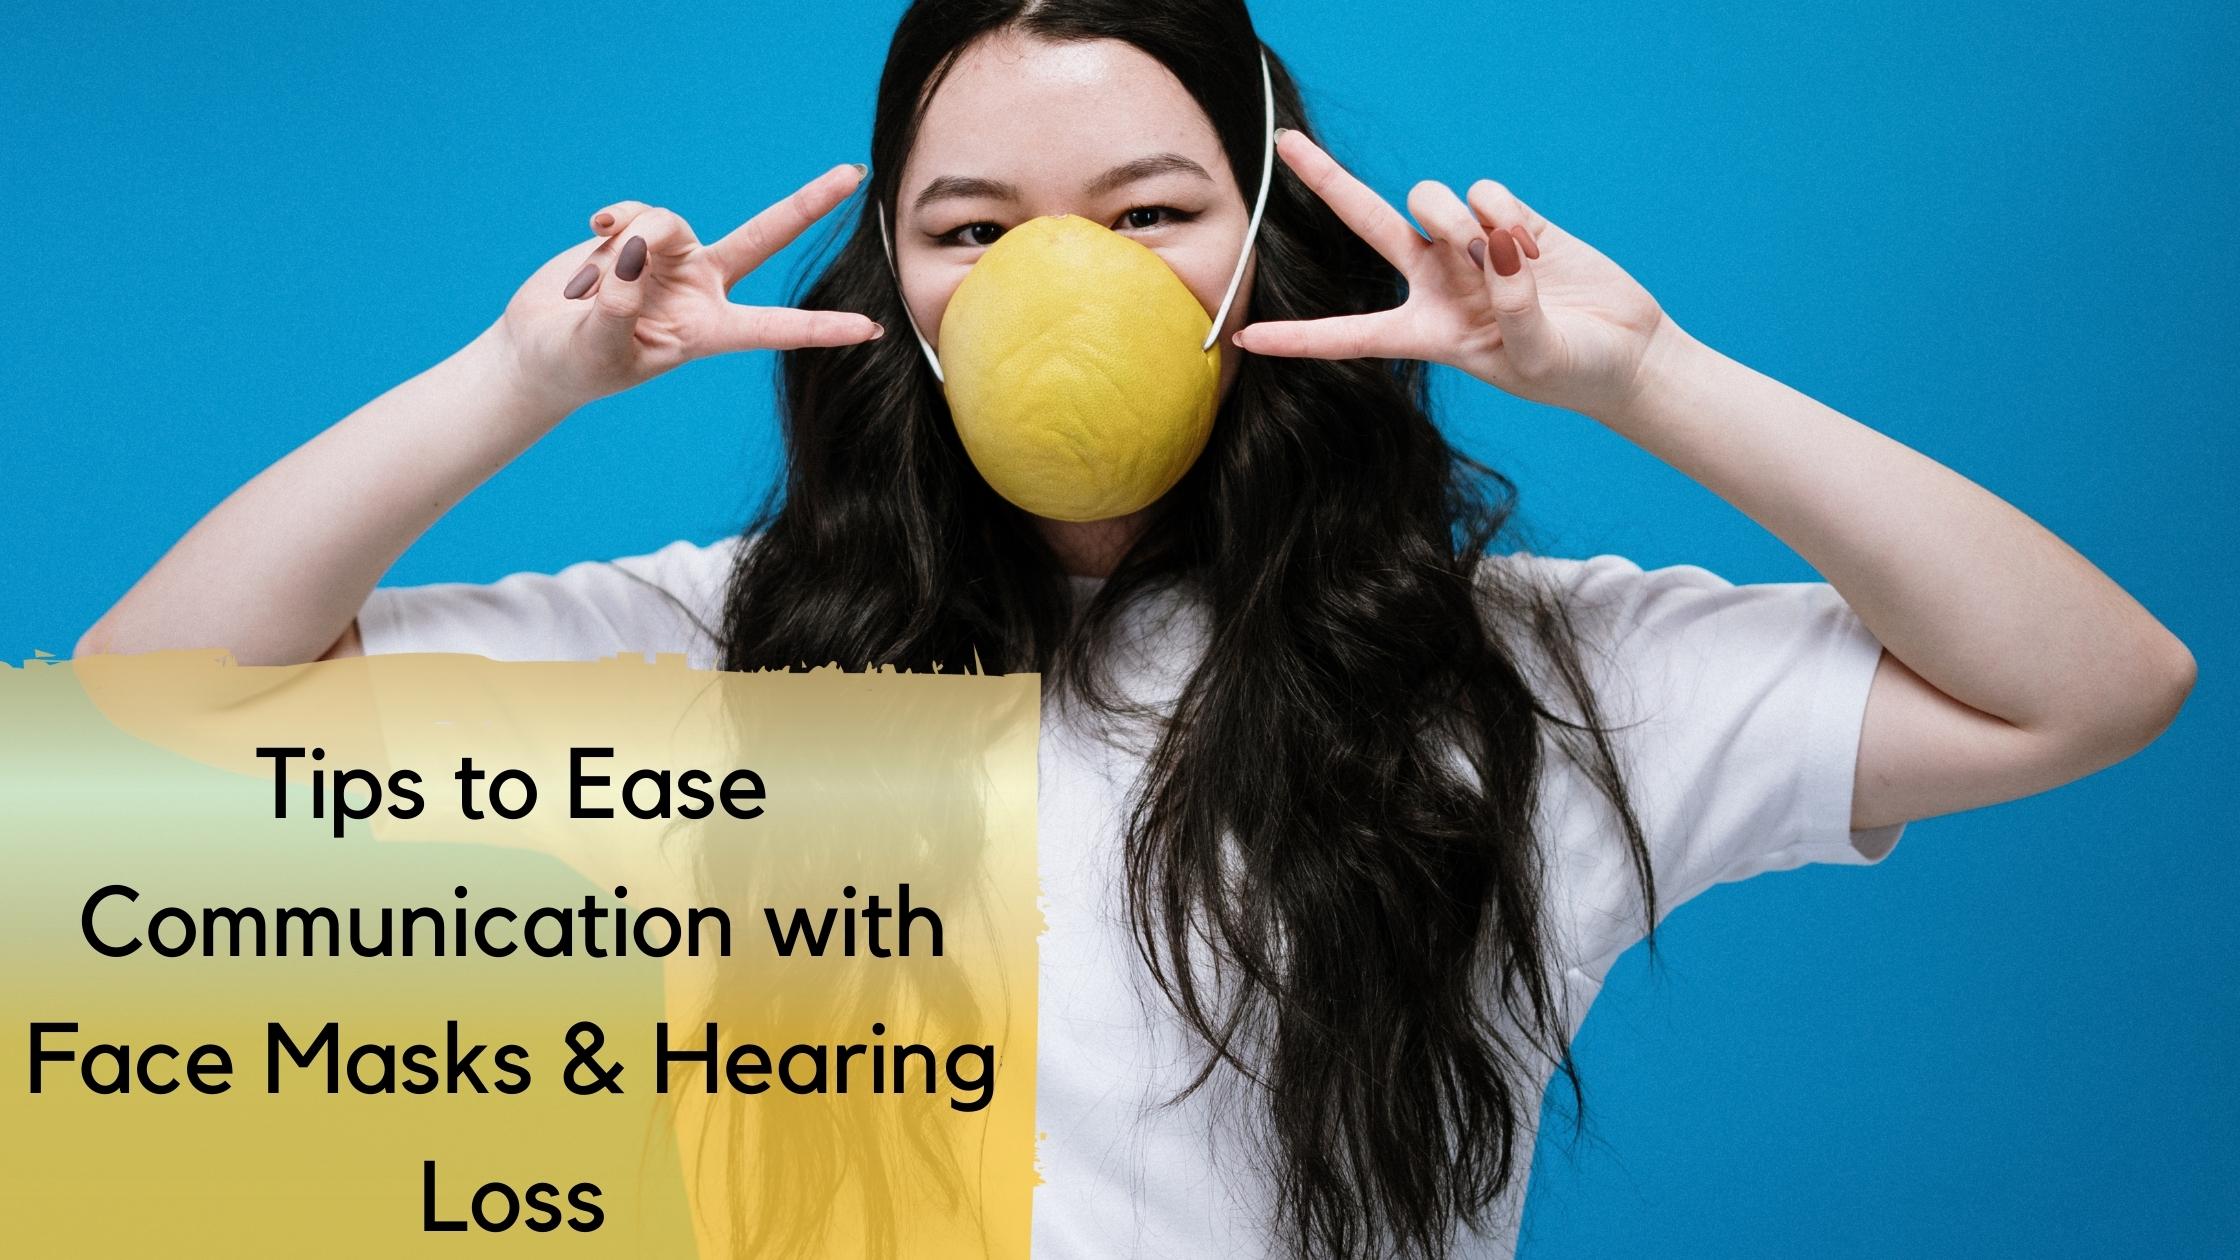 Featured image for “Tips to Ease Communication with Face Masks and Hearing Loss”